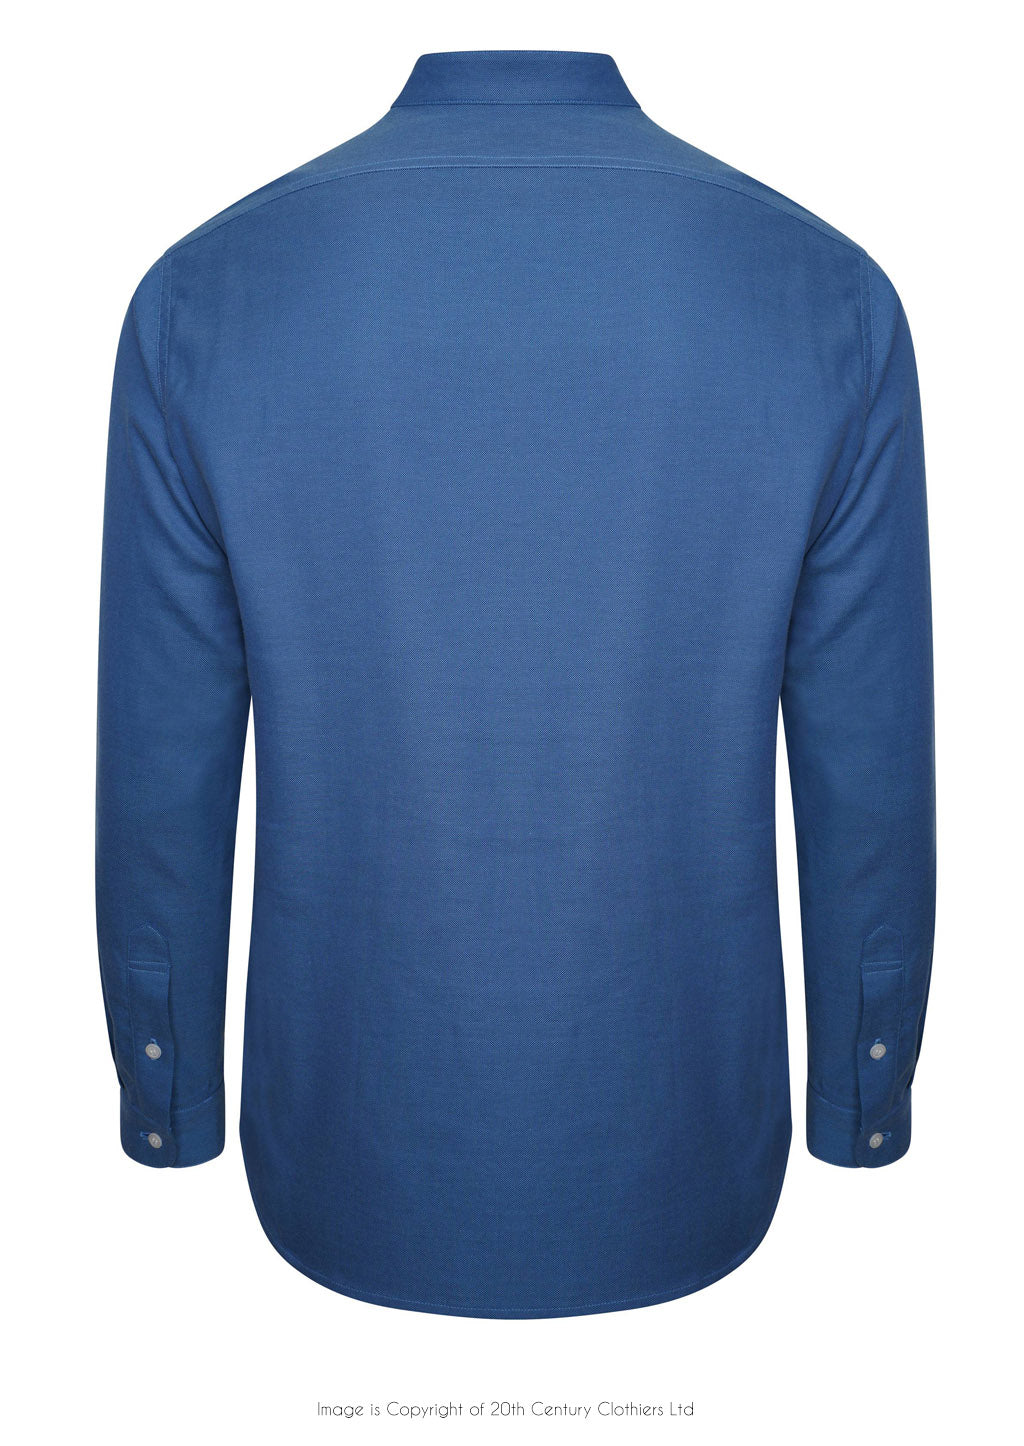 Tommys Collarless Shirt - Mid Blue